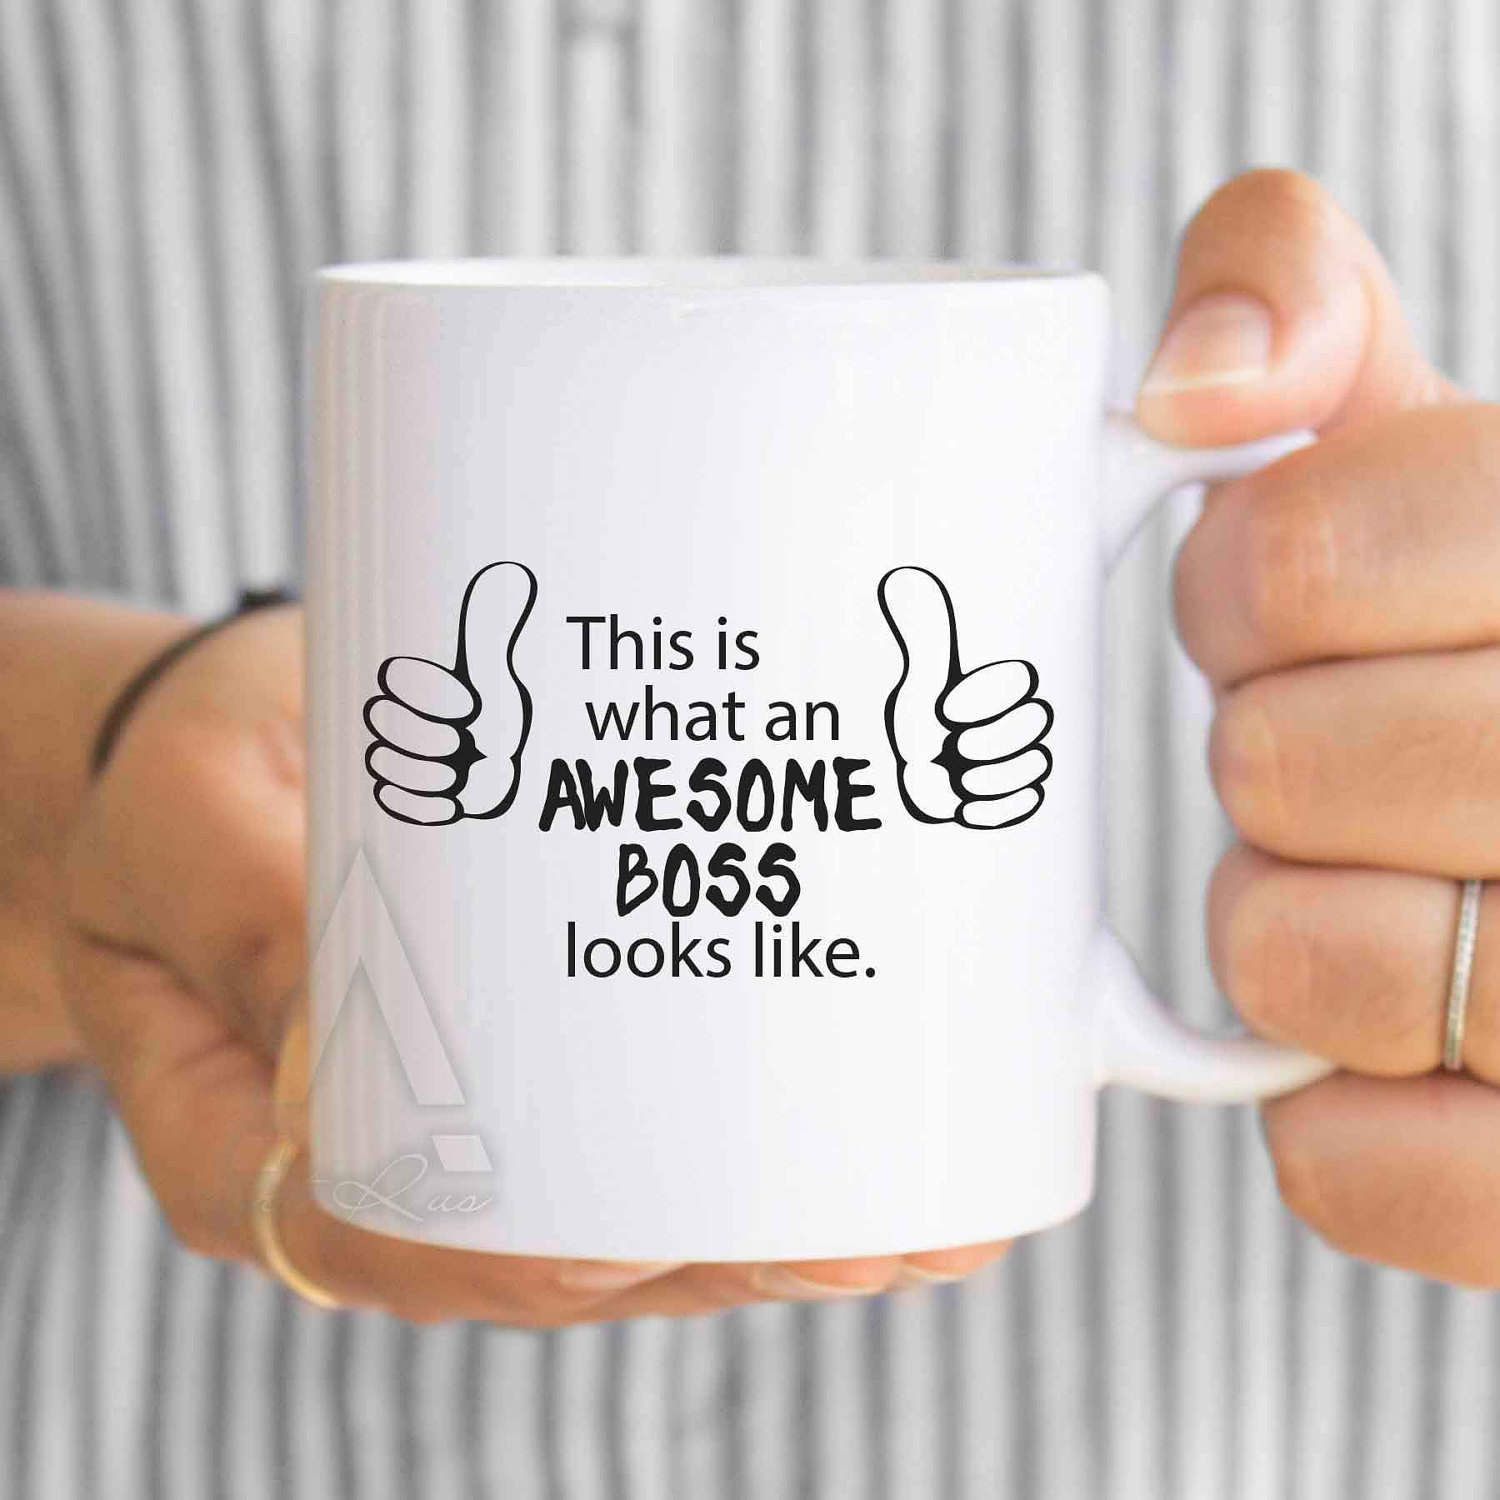 Holiday Gift Ideas For Bosses
 Boss ts christmas ts "this is what an awesome boss